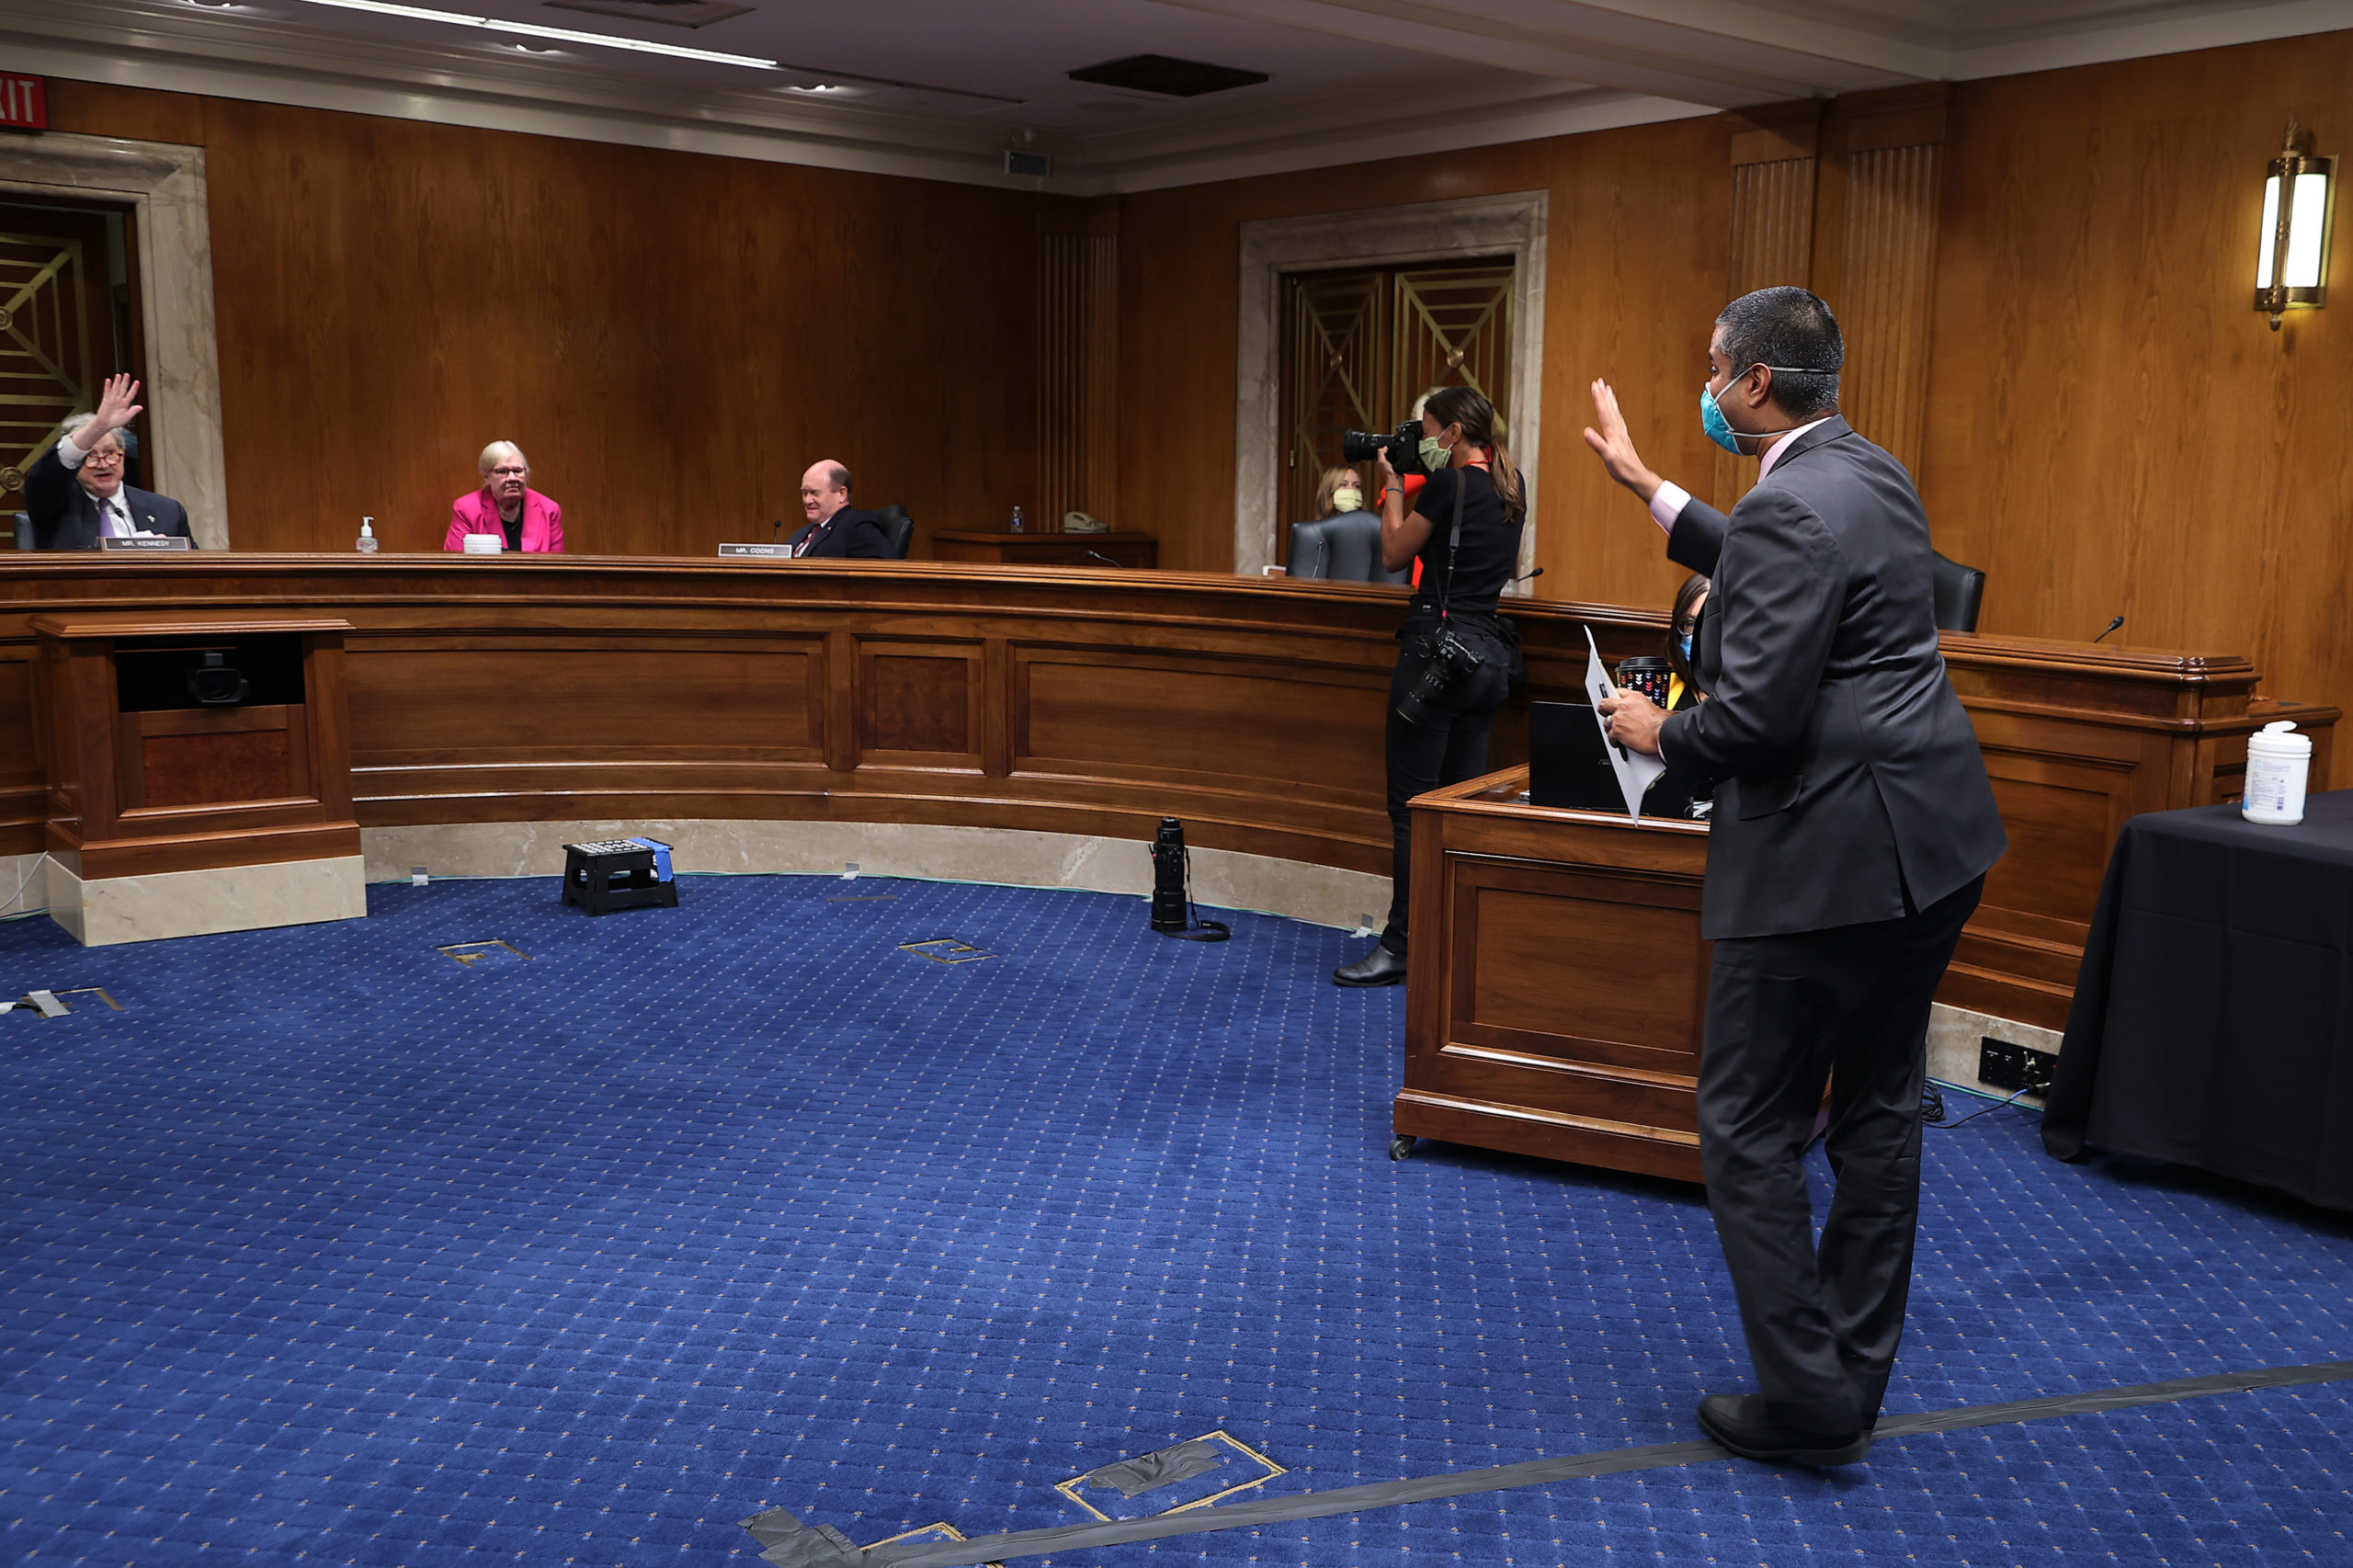 FCC Chairman Ajit Pai waves goodbye to members of a Senate Appropriations Subcommittee afters testifying during a hearing on Capitol Hill in June. (Chip Somodevilla/Getty Images)